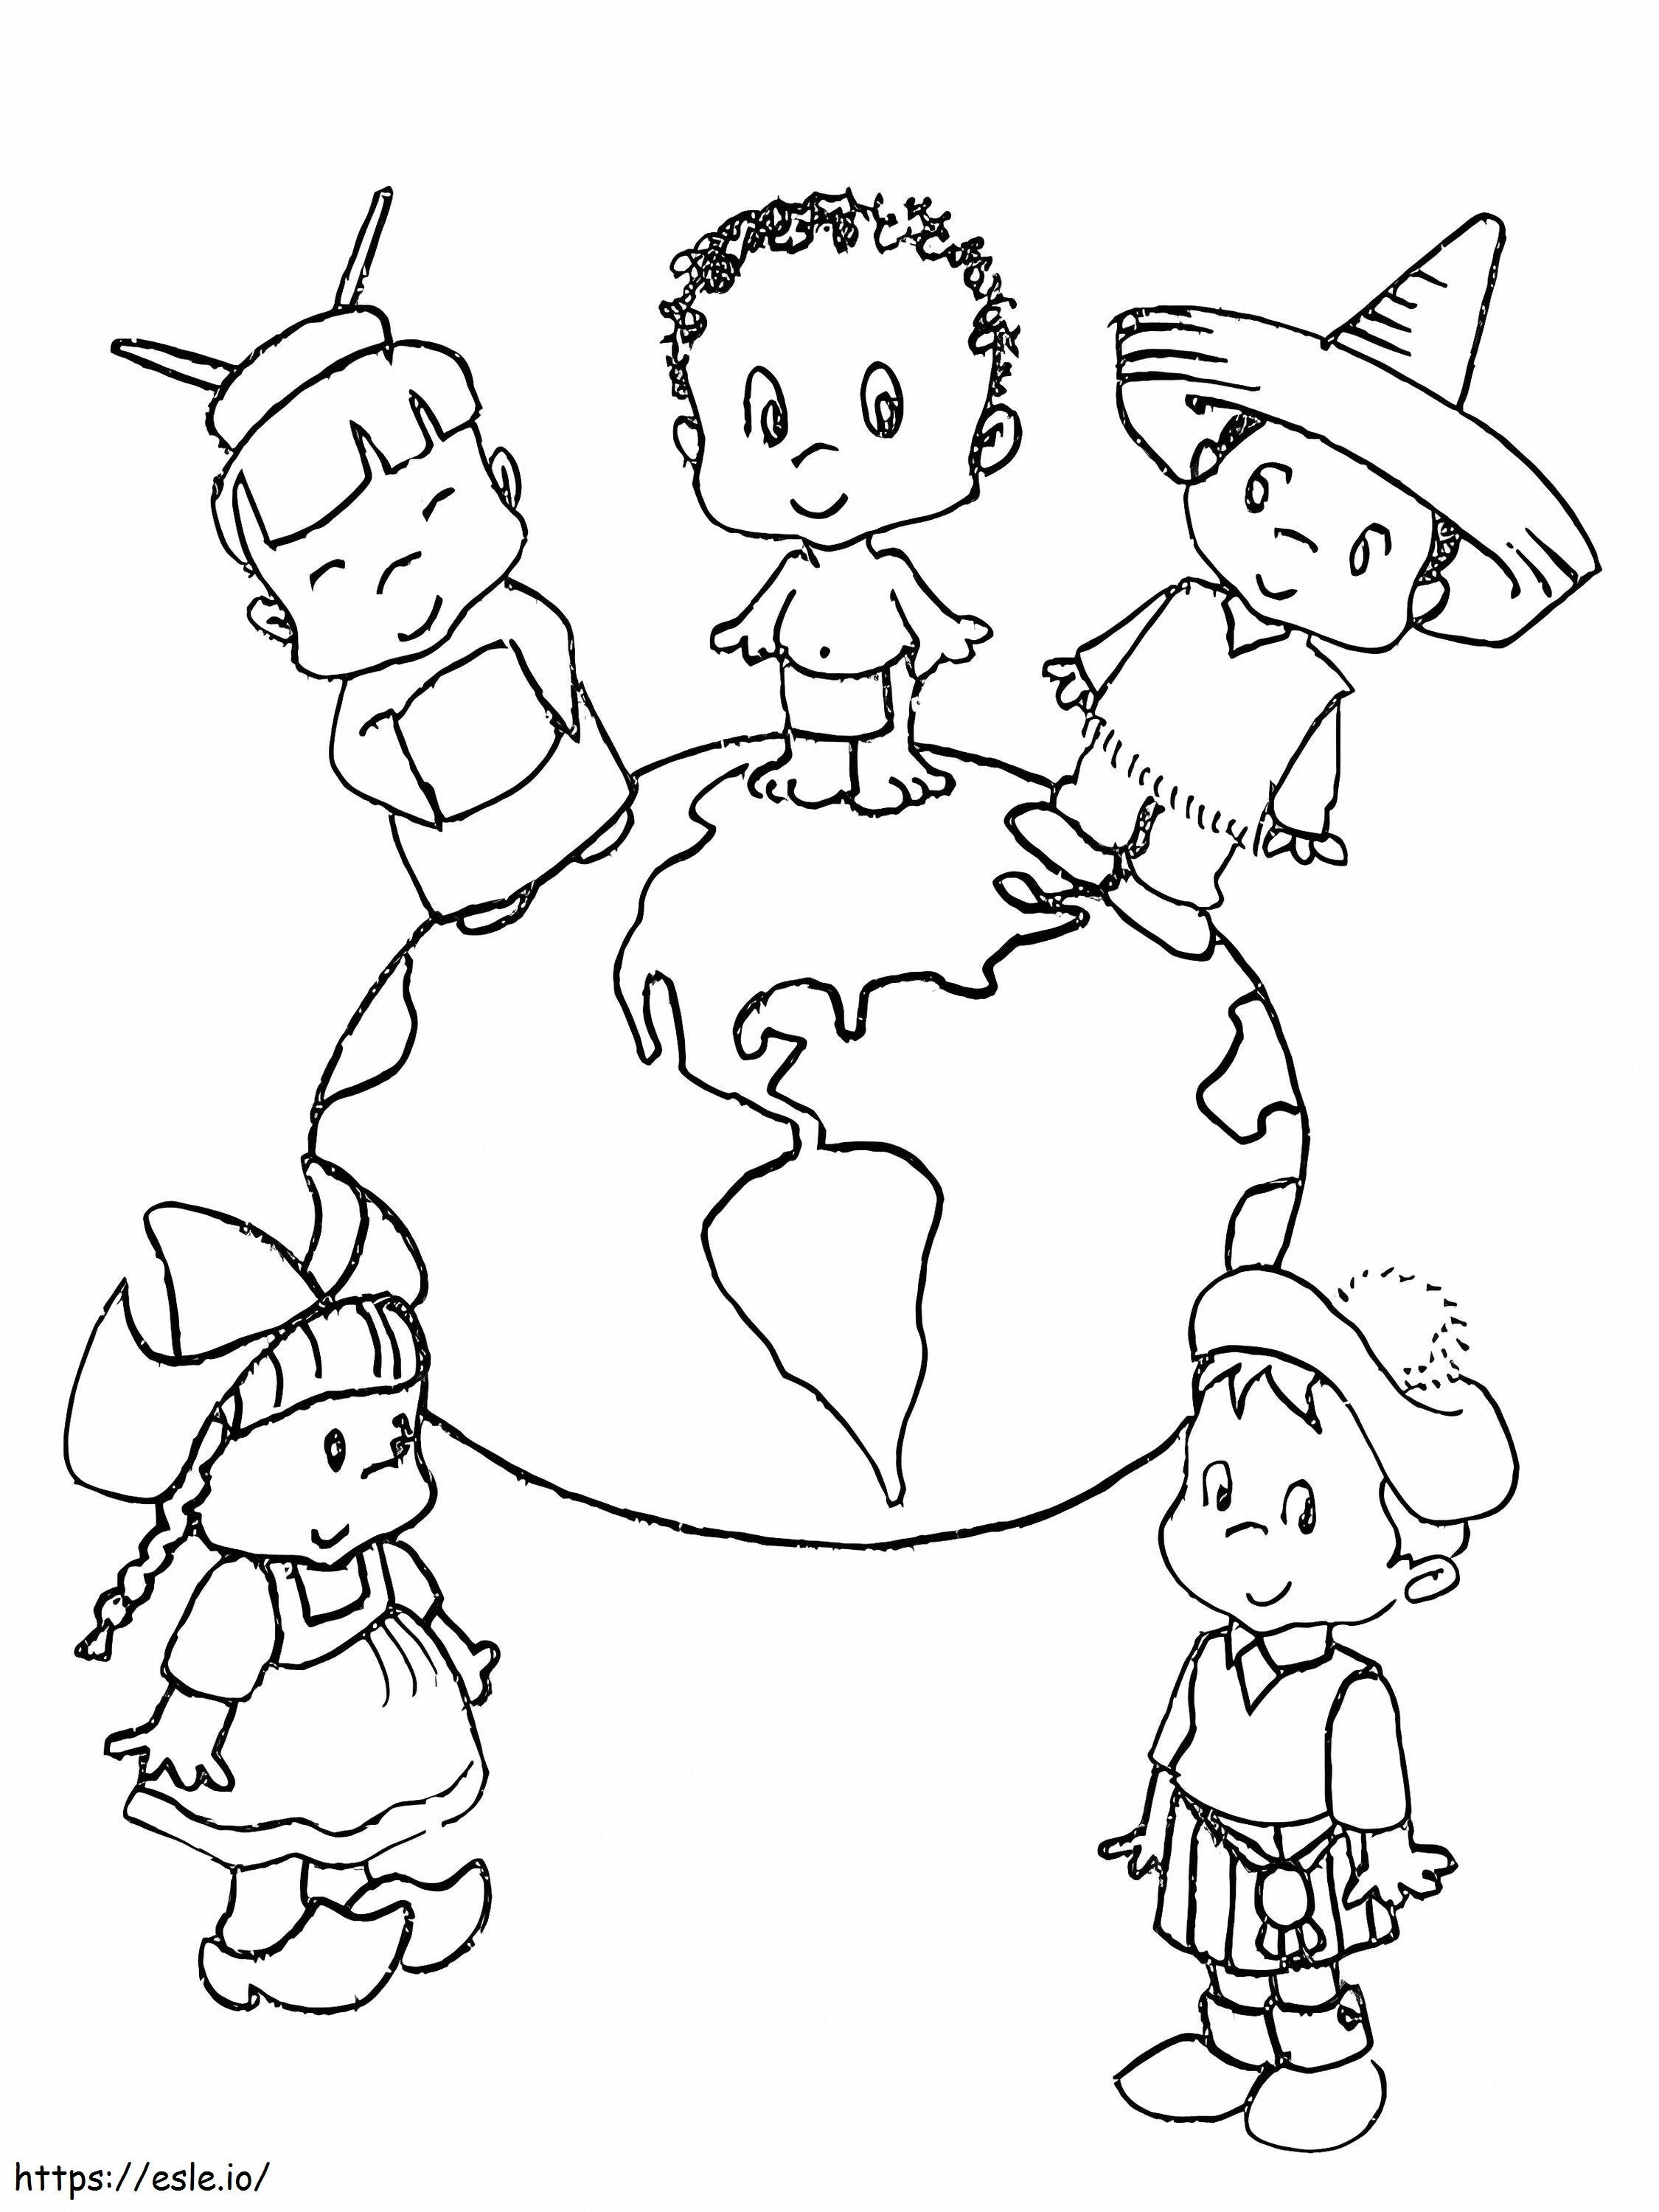 Childrens Day 4 coloring page